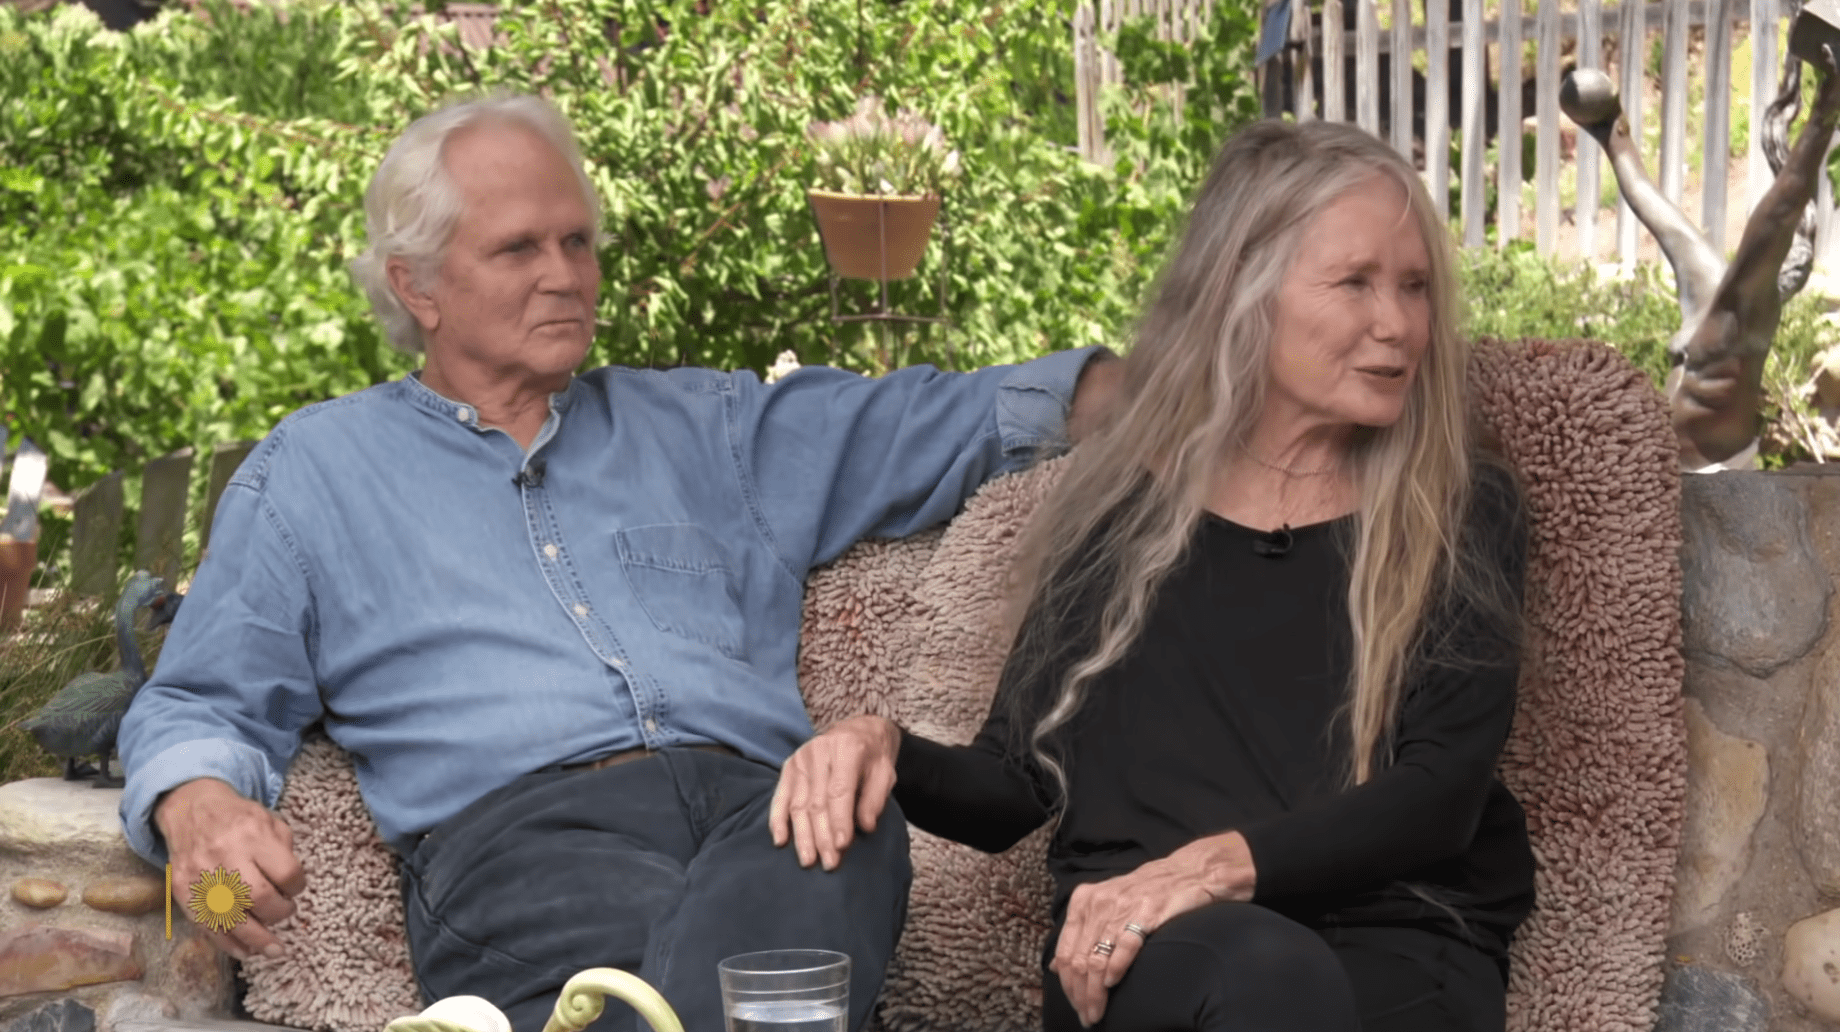 Tony Dow and his wife, Lauren Shulkind, were interviewed in their Los Angeles home on January 18, 2022. | Source: YouTube/CBS Sunday Morning